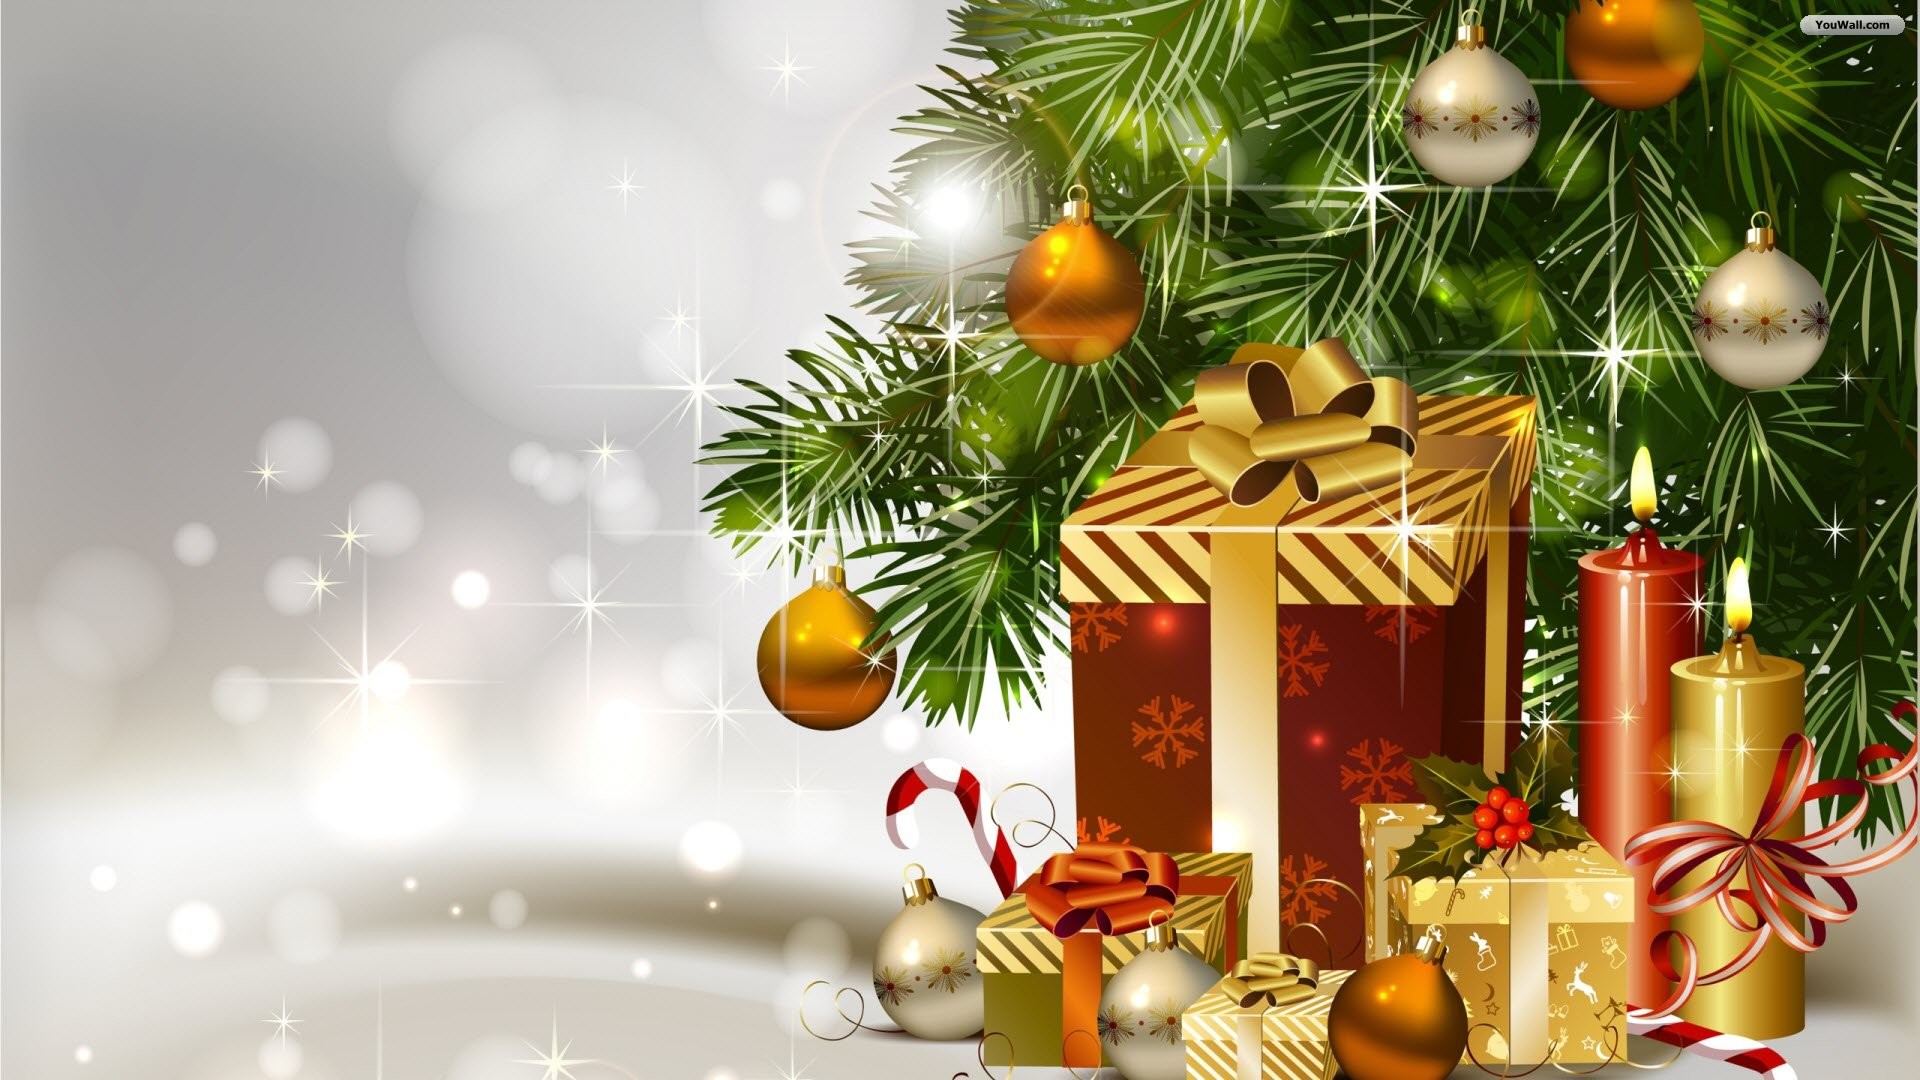 1920x1080 ... hd wallpaper pictures; christmas tree background wallpaper ...